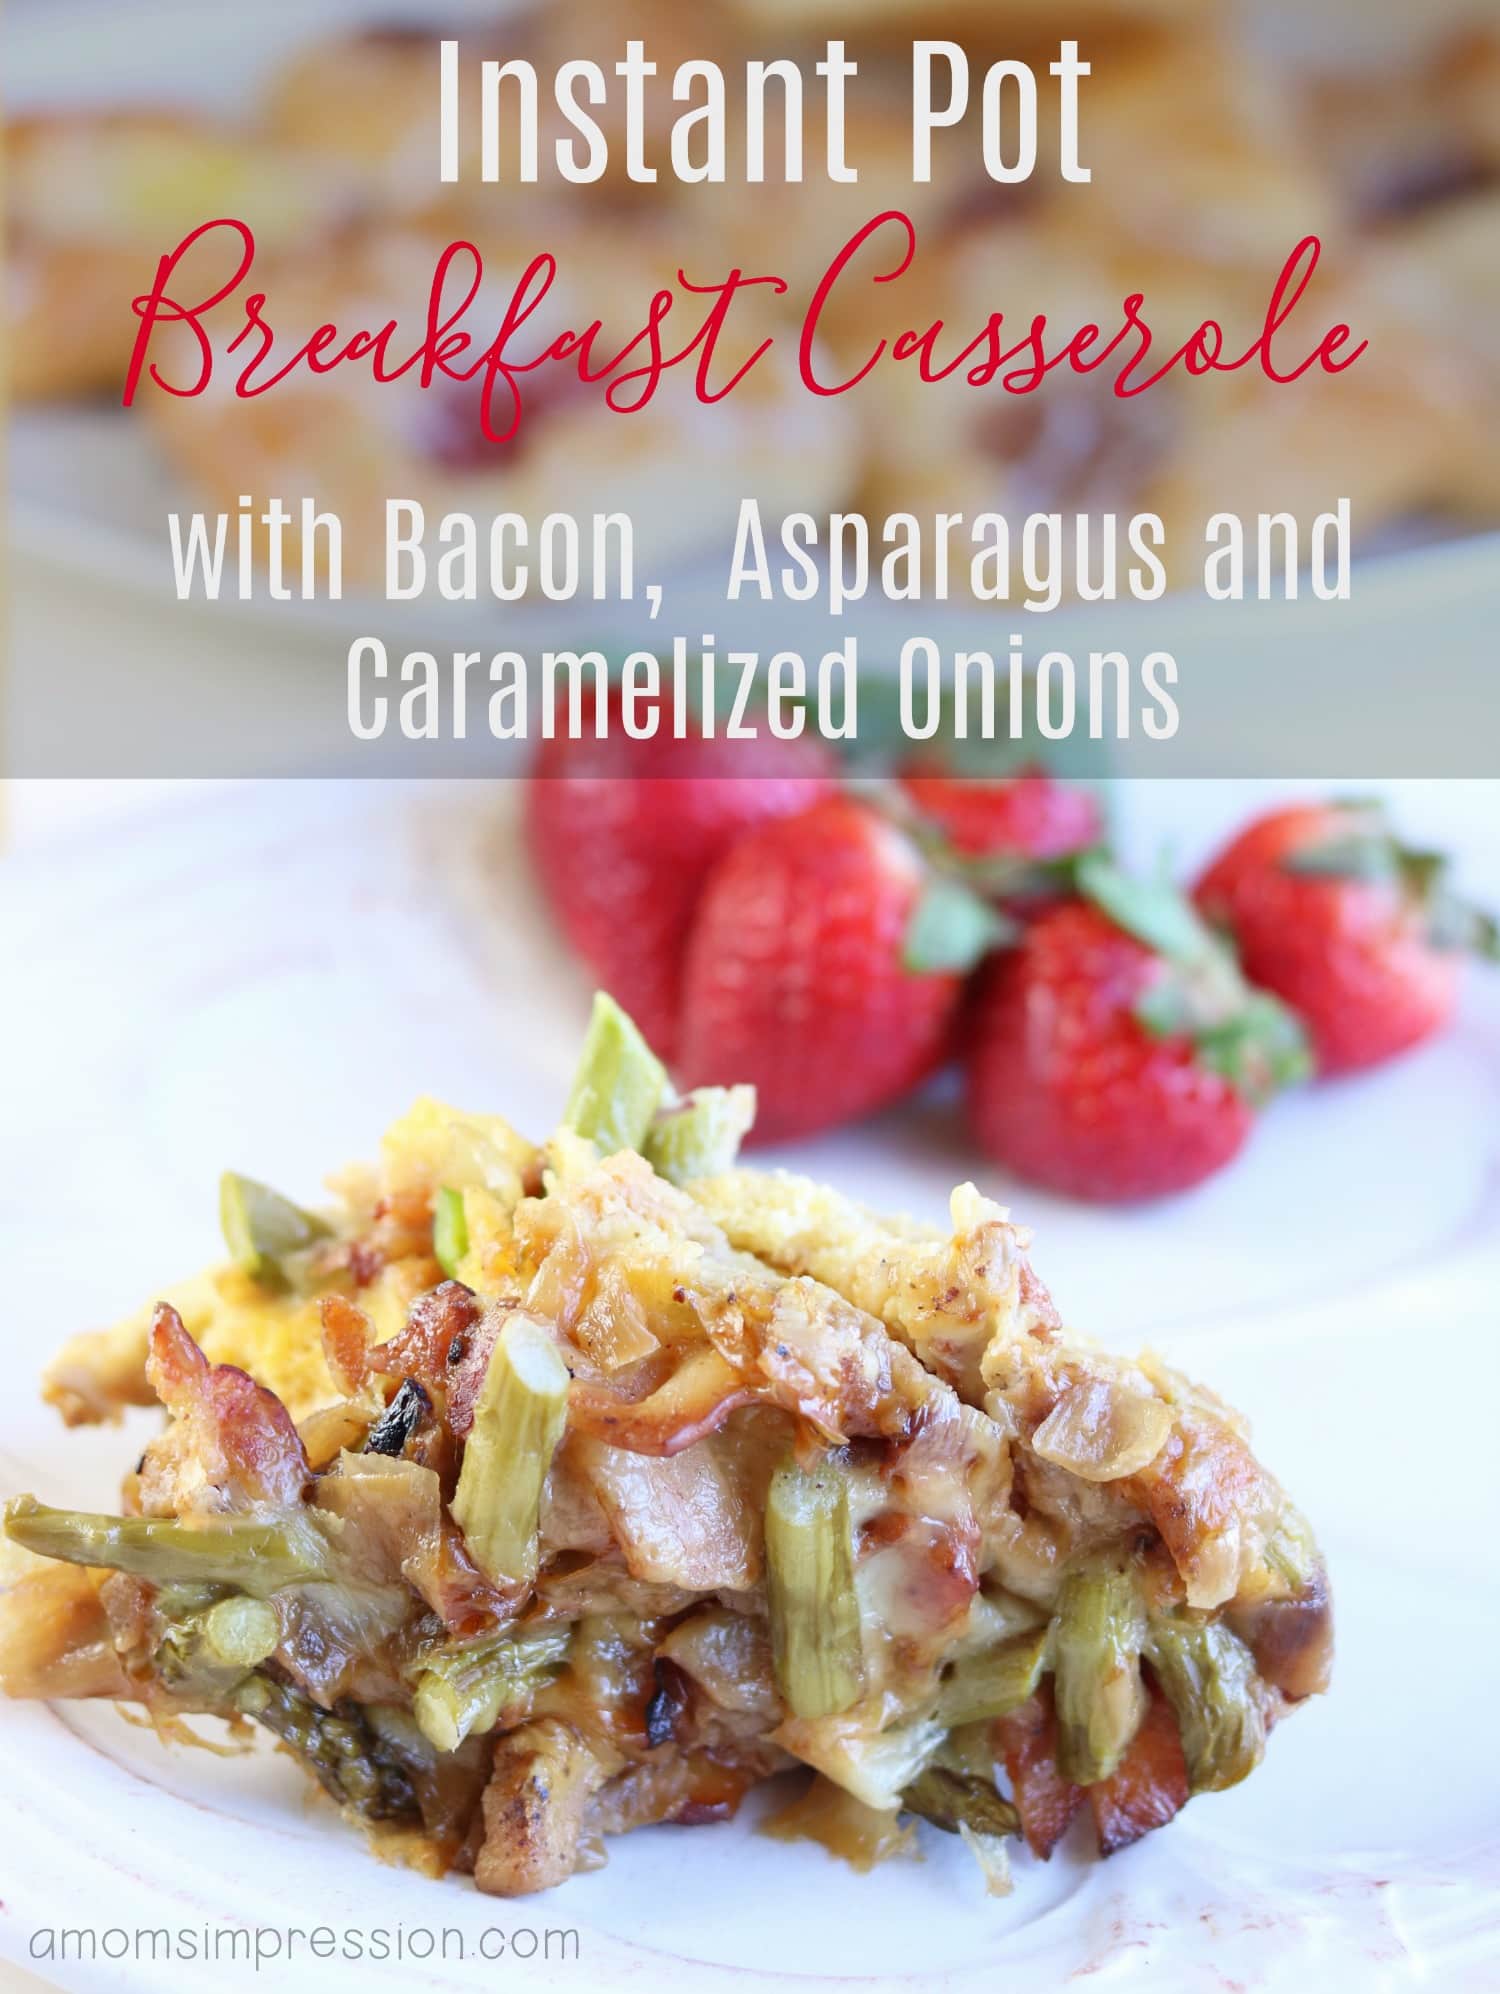 Do you use your Instant Pot for breakfast? If not you will now! This Instant Pot Breakfast Casserole with Bacon, Asparagus and Caramelized Onions looks amazing and tastes just as good. I love that it's so easy and has healthy ingredients.